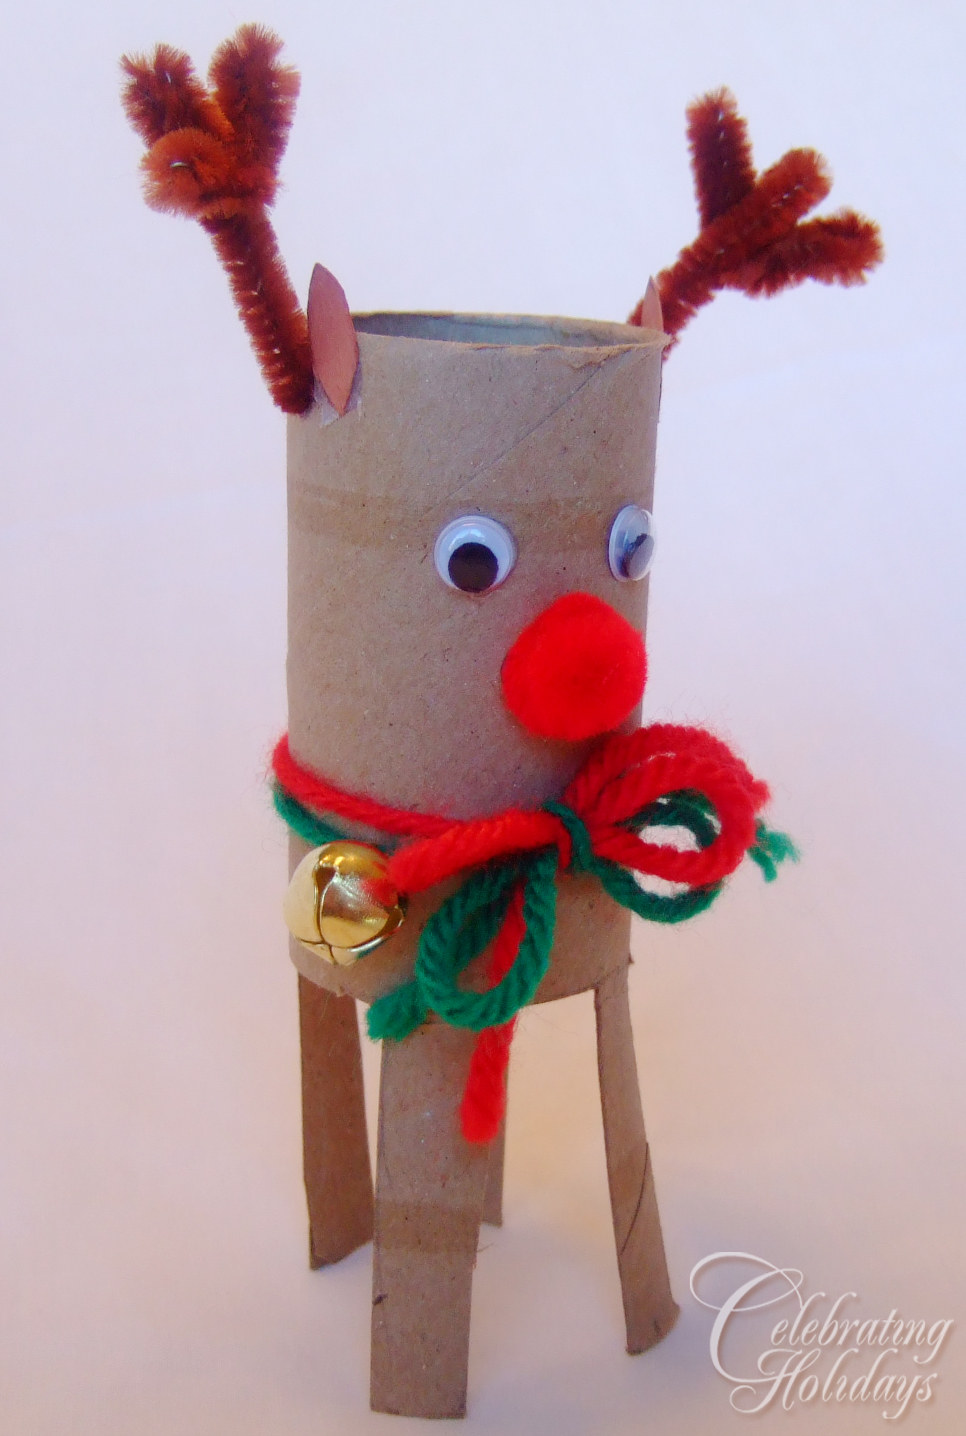 Paper Tube Reindeer Craft for Christmas